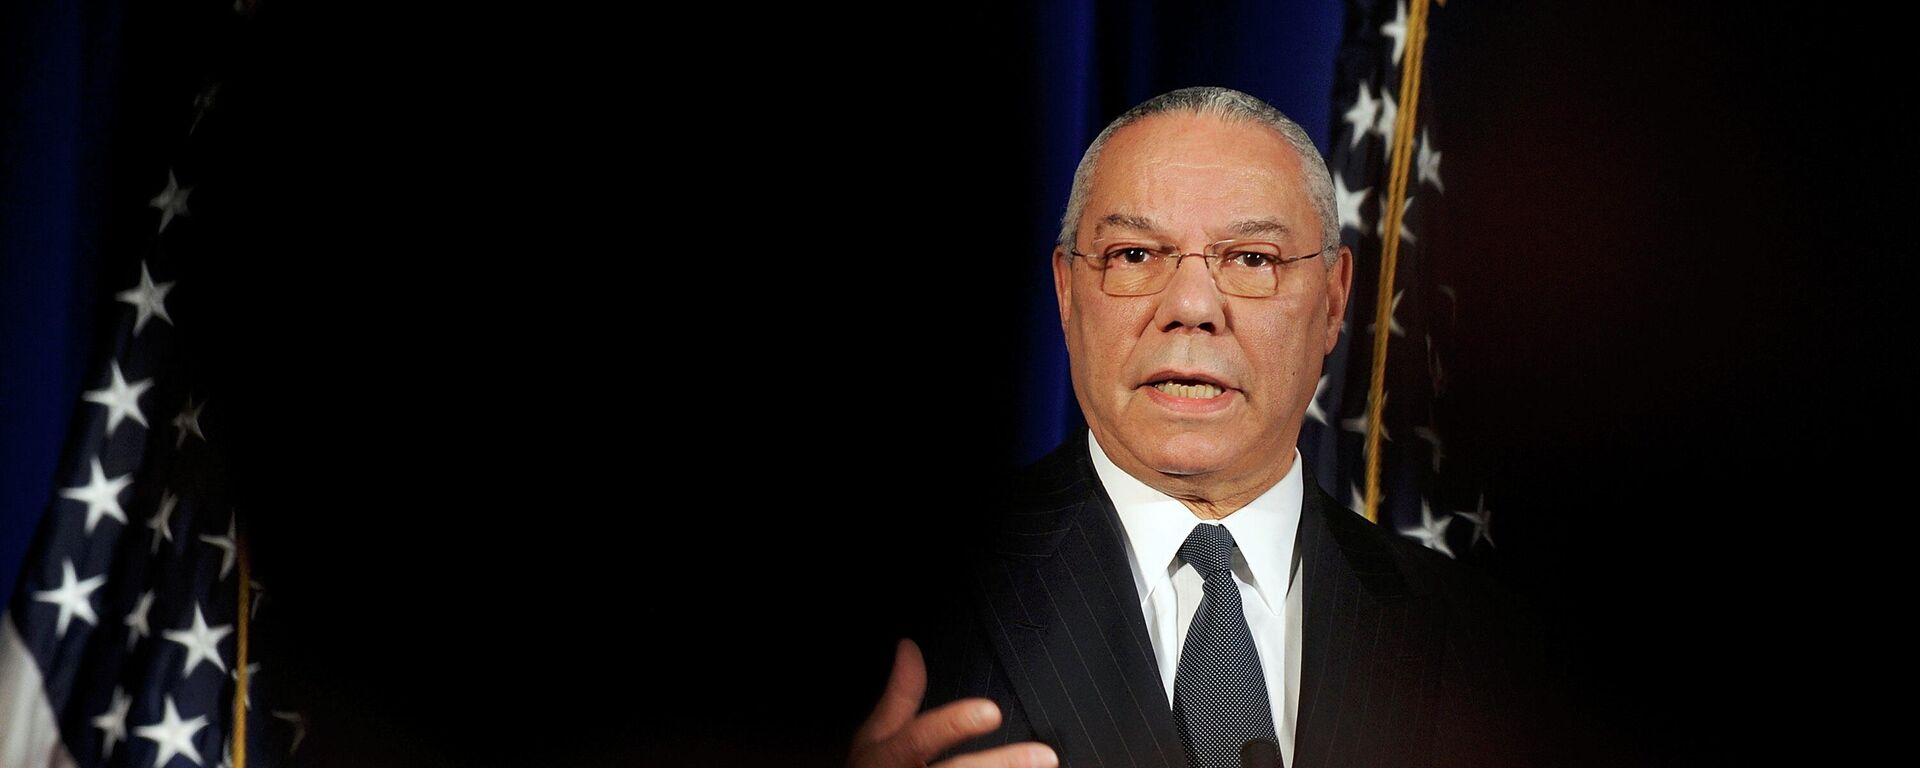 Former U.S. Secretary of State Colin Powell, co-chairman of the Presidential Inaugural Committee for US President-elect Barack Obama, speaks to reporters during a news conference to announce Obama's Renew America Together volunteer initiative, in Washington January 9, 2009/File Photo - Sputnik International, 1920, 18.10.2021